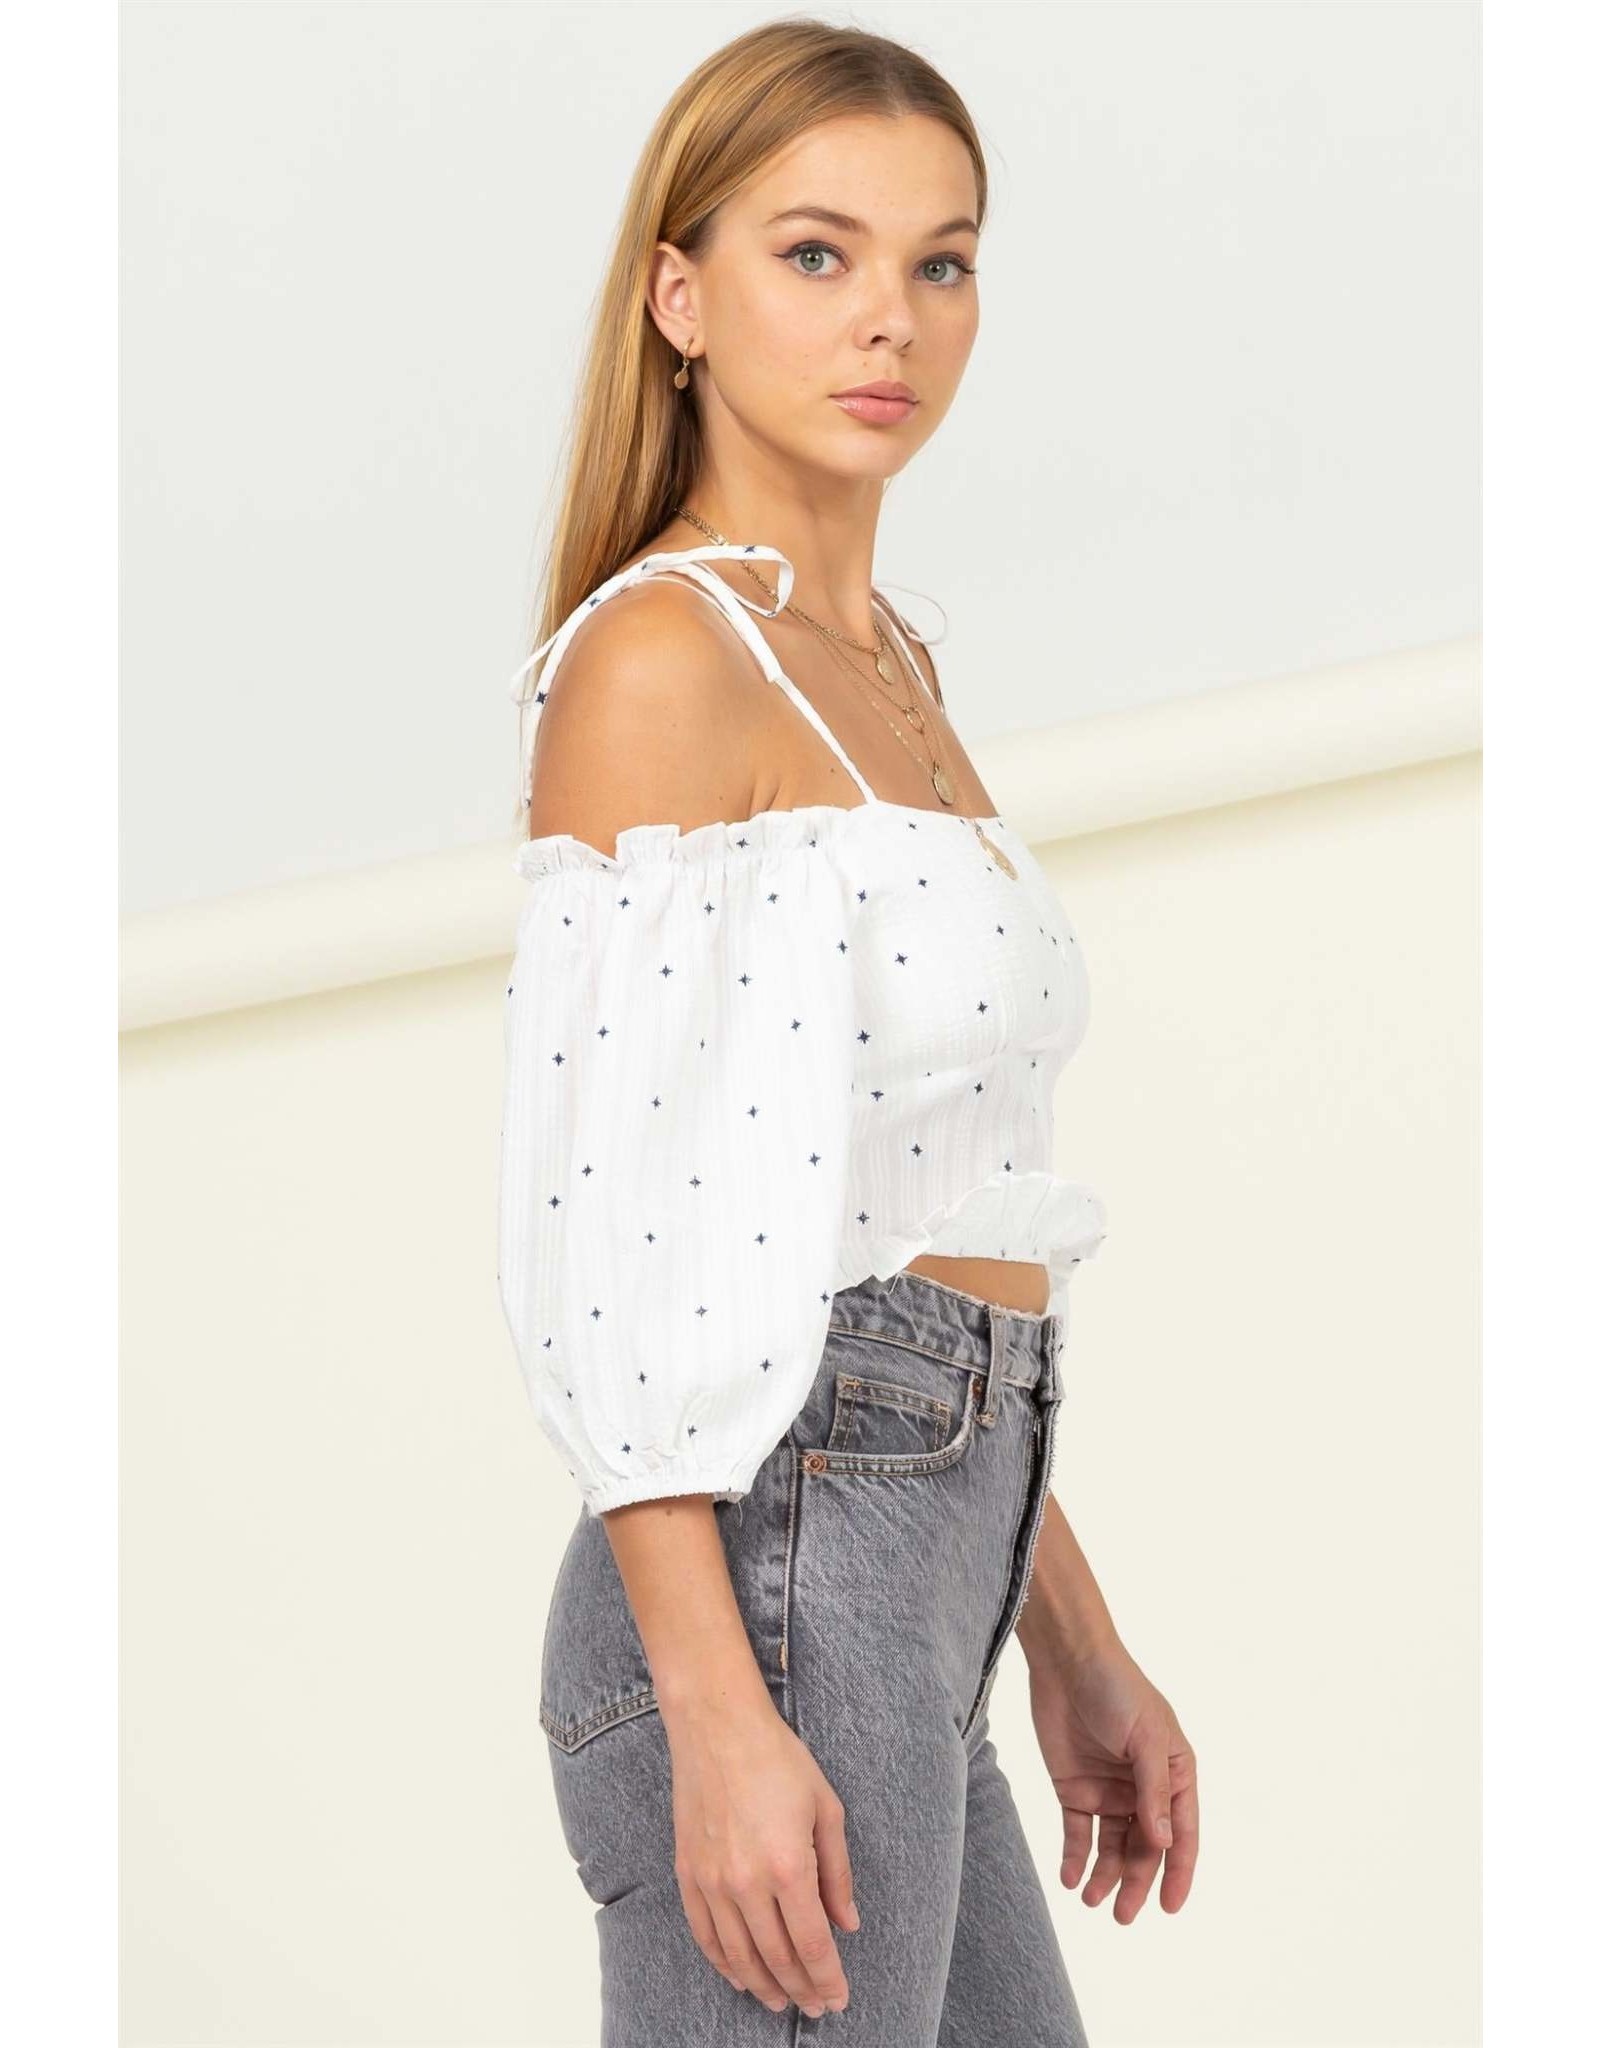 HYFIVE Limitlessly Cute Off the Shoulder Blouse